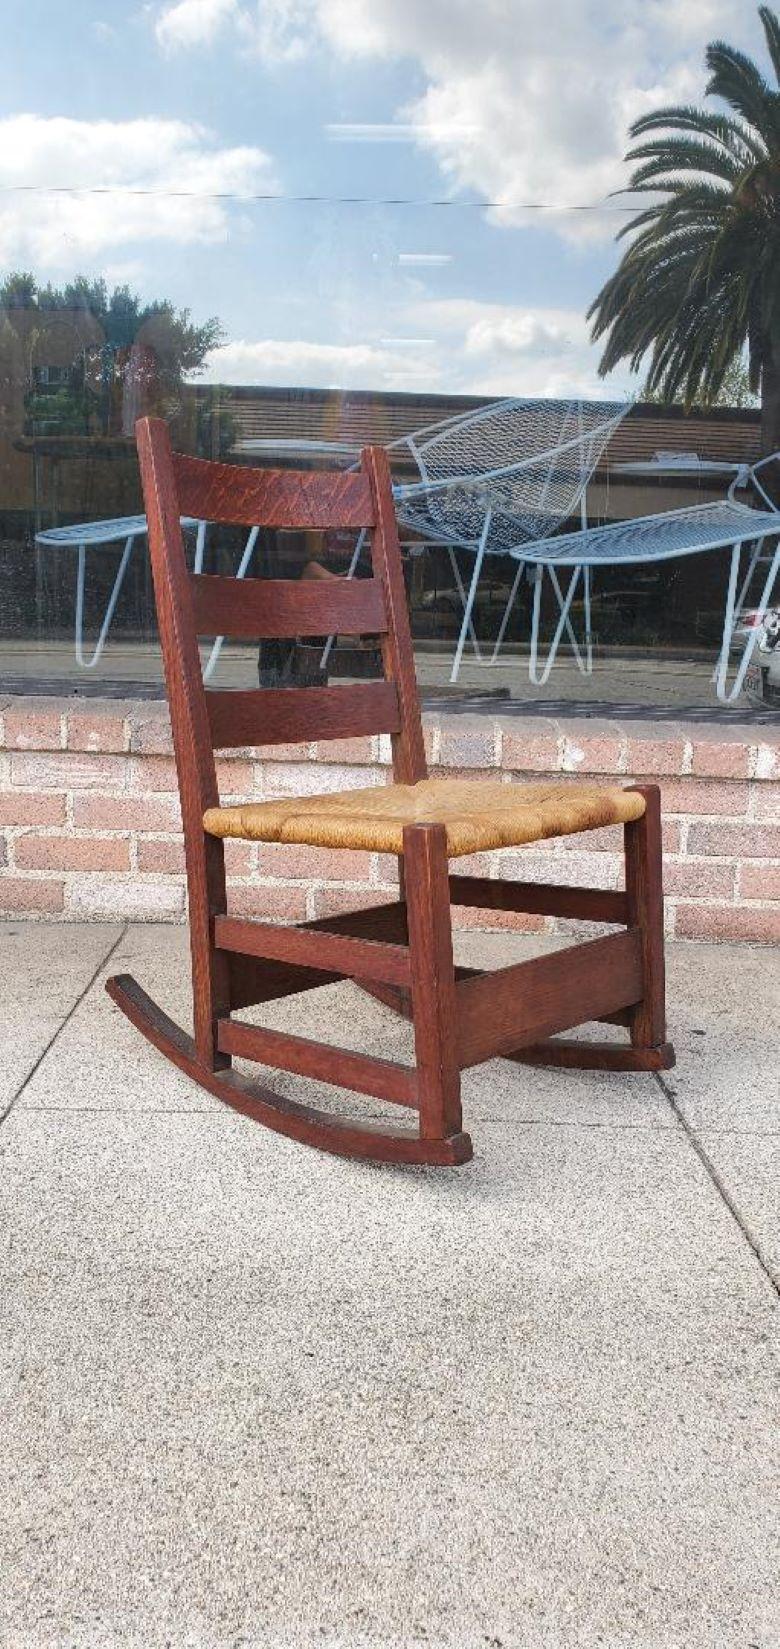 GUSTAV STICKLEY Early American Craftsman Mission Quarter Sawn Oak Youth Rocker 1900s.

Early American Antique Piece Of Furniture and History.

This Early Antique Craftsman Mission Quarter Sawn Oak Rocker Is Also Known As A Sewing Rocker.

This